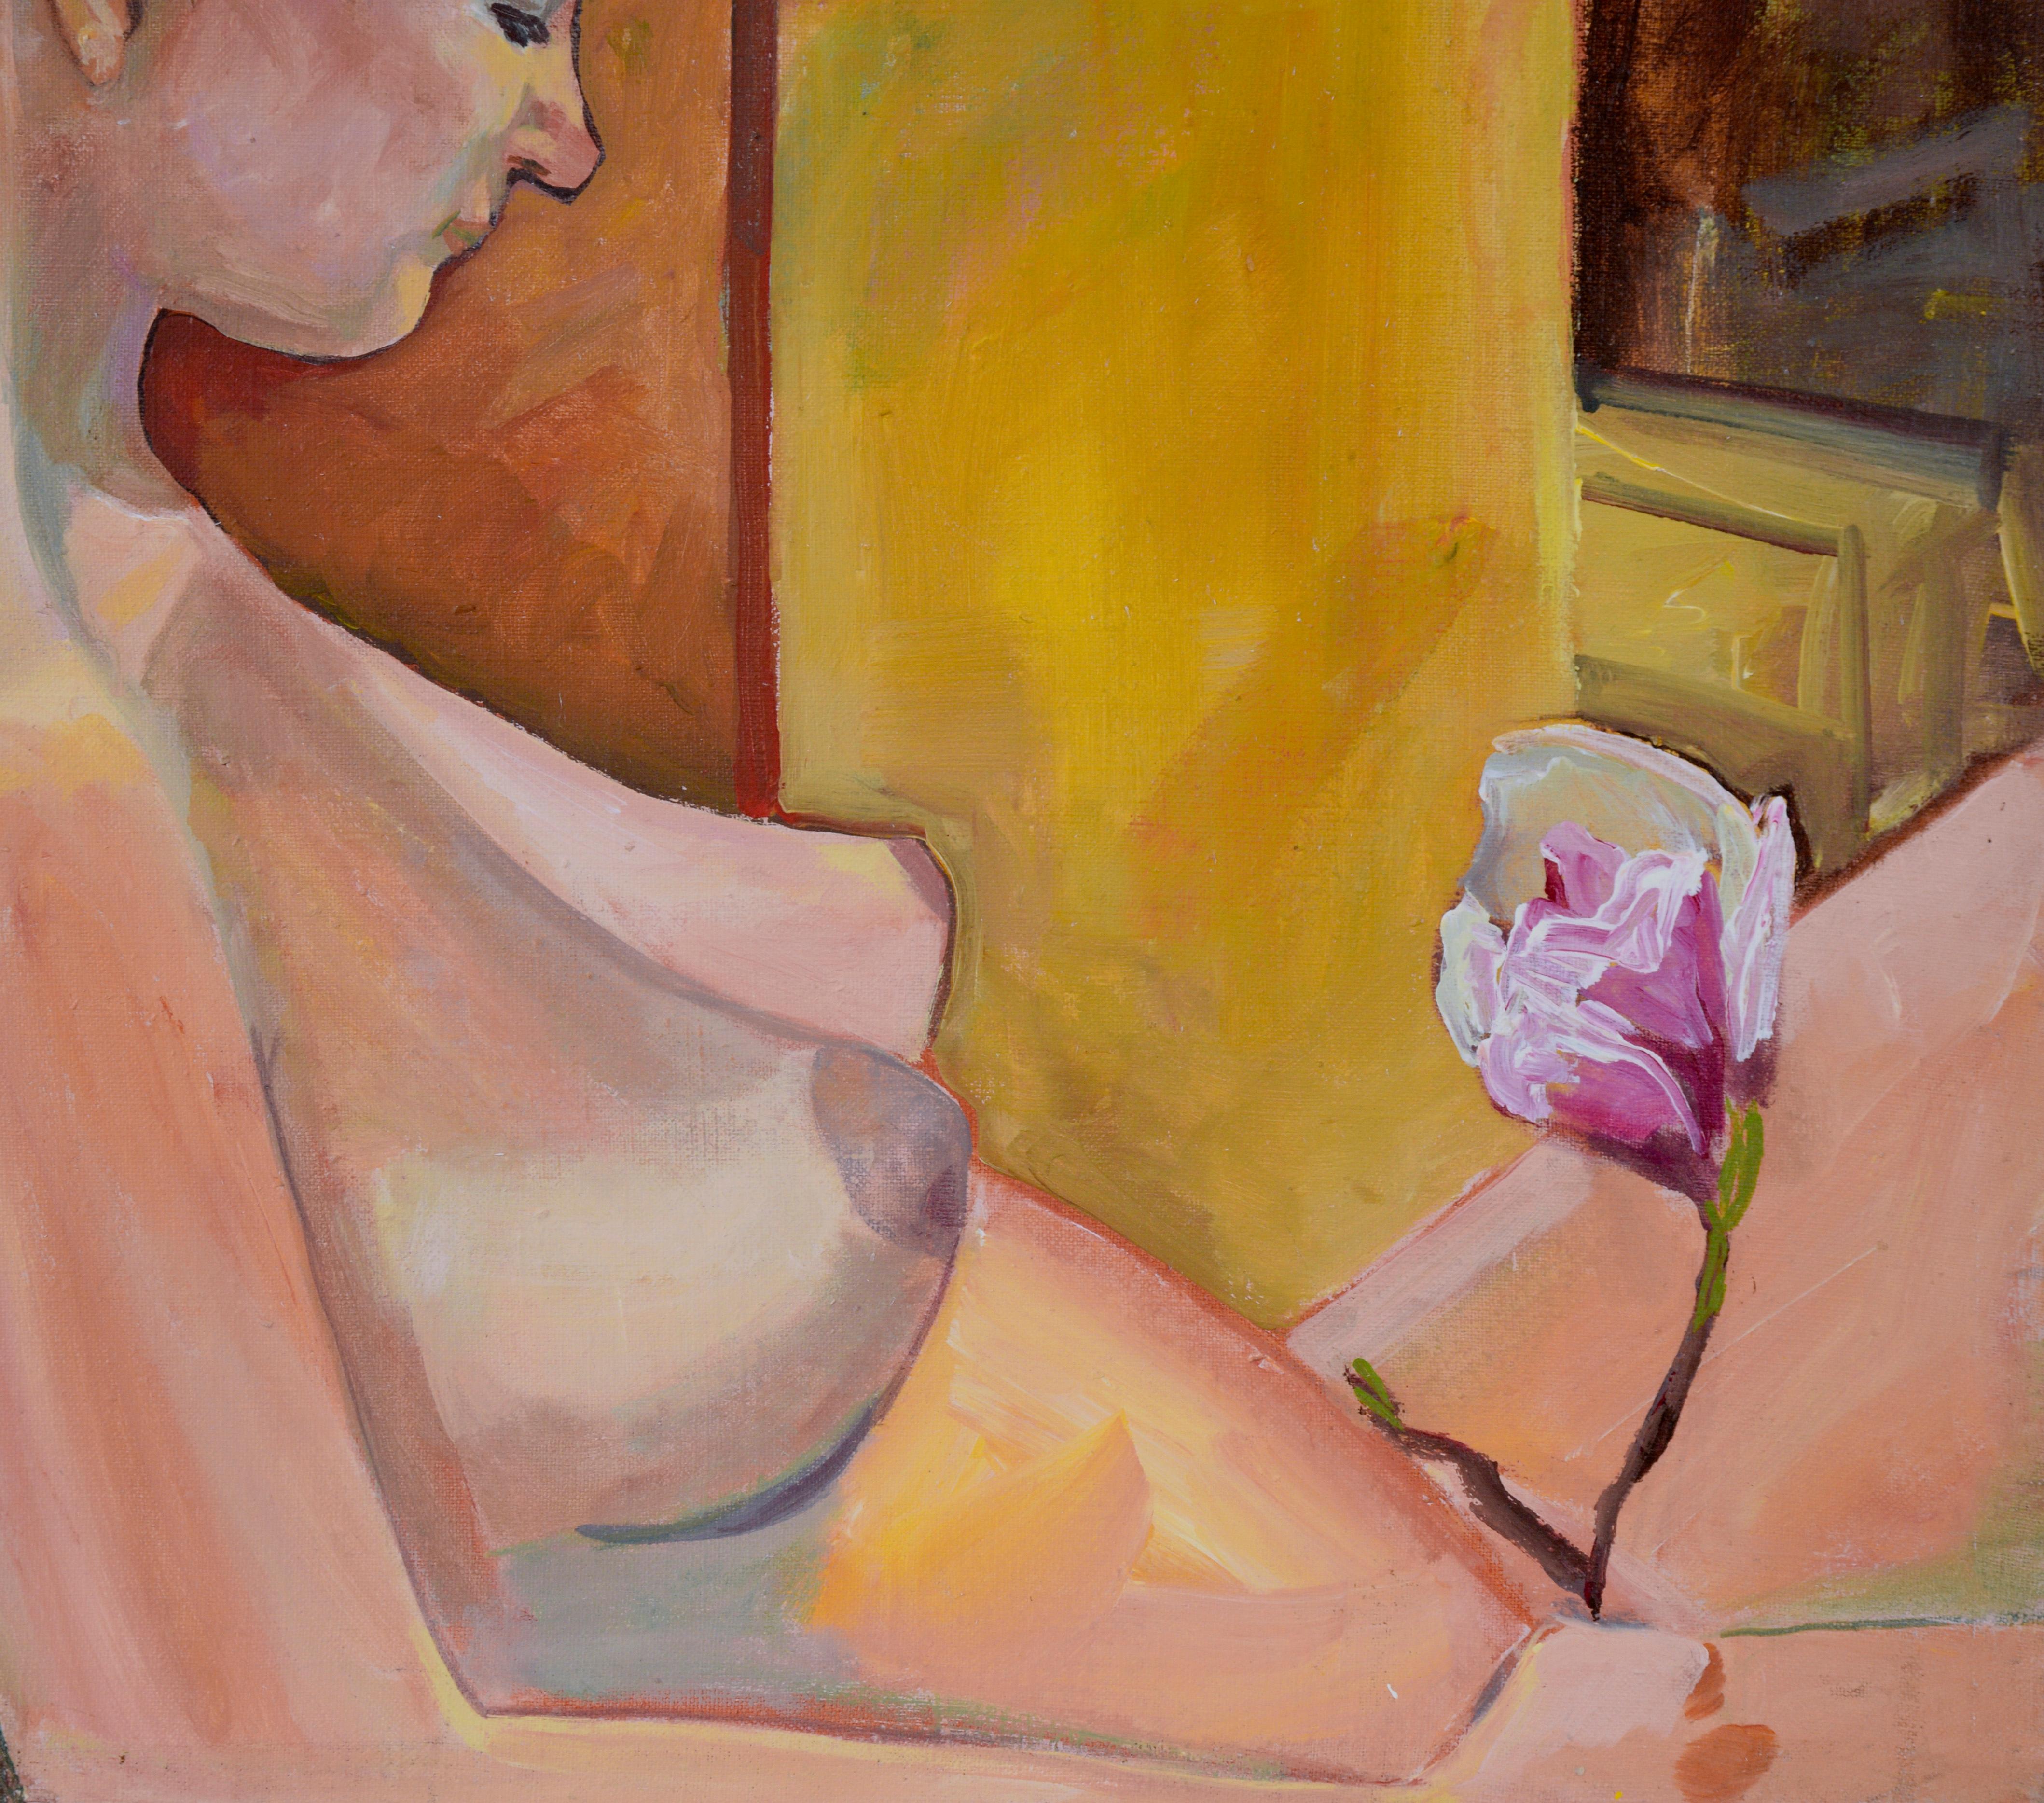 Woman in Bloom - Figurative Nude Study Oil on Canvas

A nude woman, seemingly pregnant, sits reclined in a chair with her hands at the base of her belly holding a flower. This striking painting by American painter, Patricia Gren Hayes (b. 1932), is